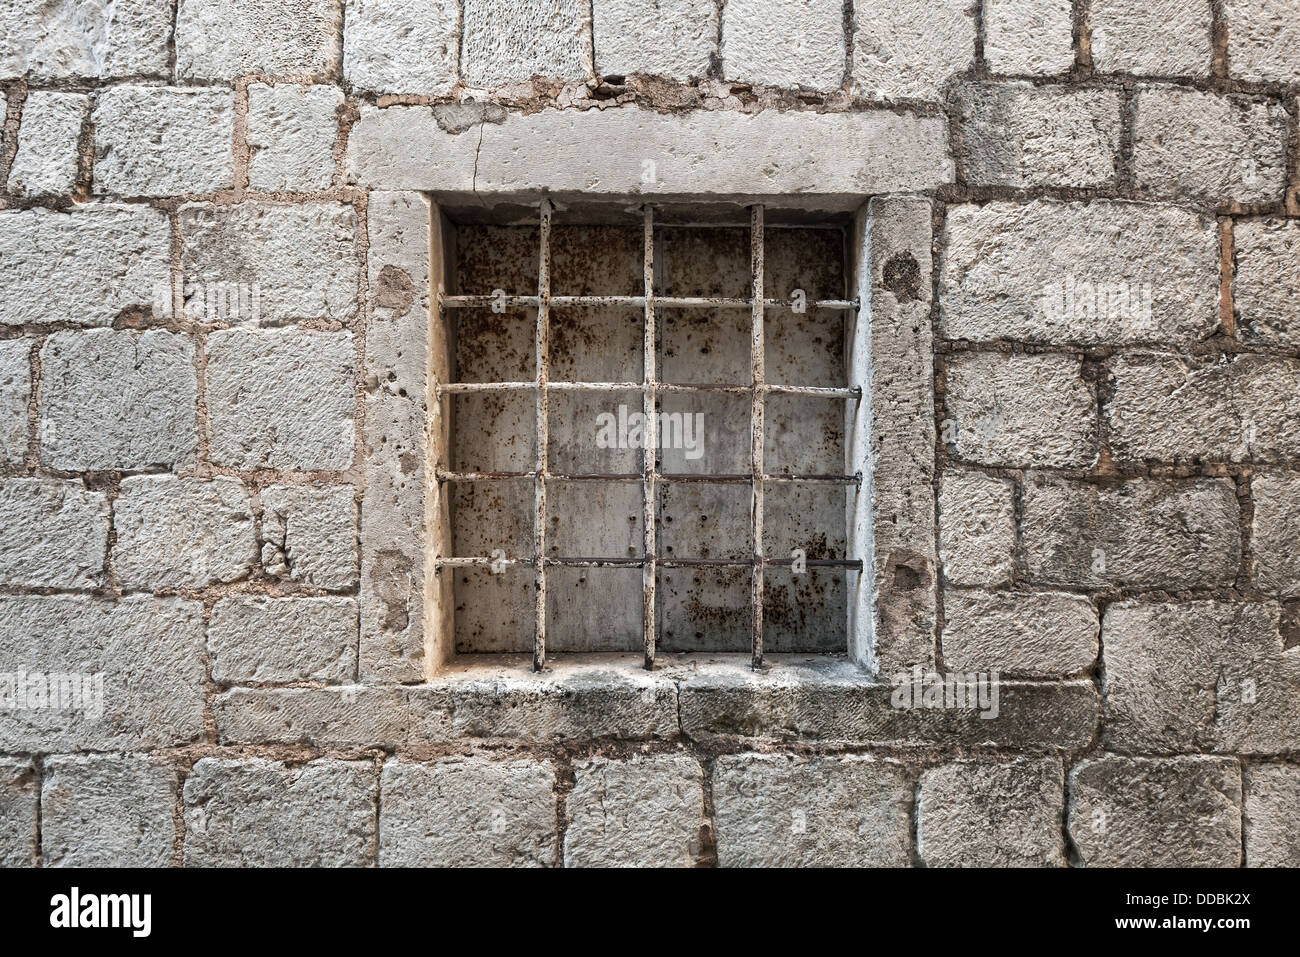 Locked ancient stone prison wall with metal window bars Stock Photo